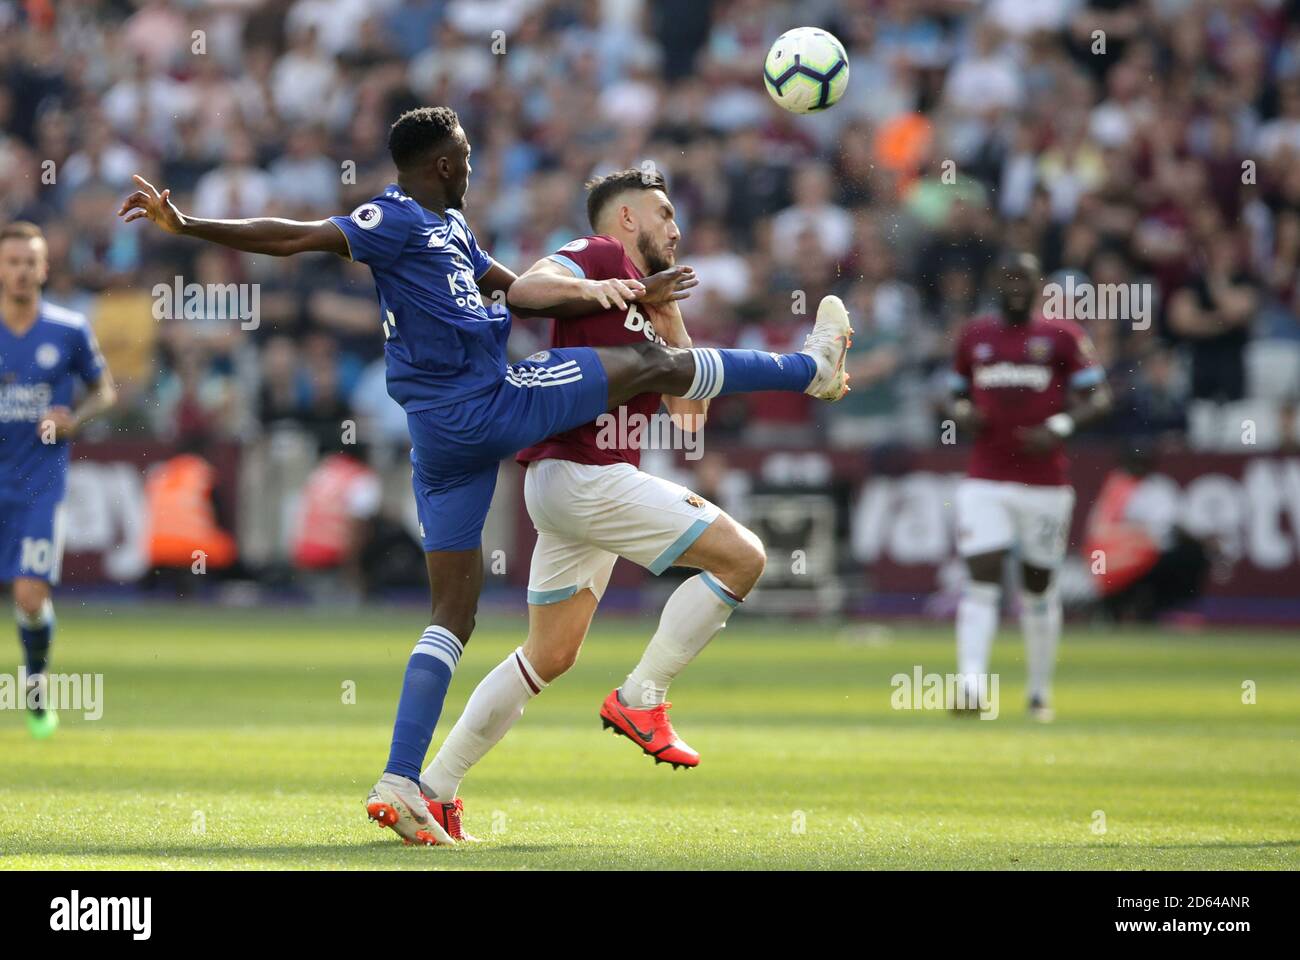 Leicester City's Wilfred Ndidi (left) and West Ham United's Robert Snodgrass battle for the ball Stock Photo